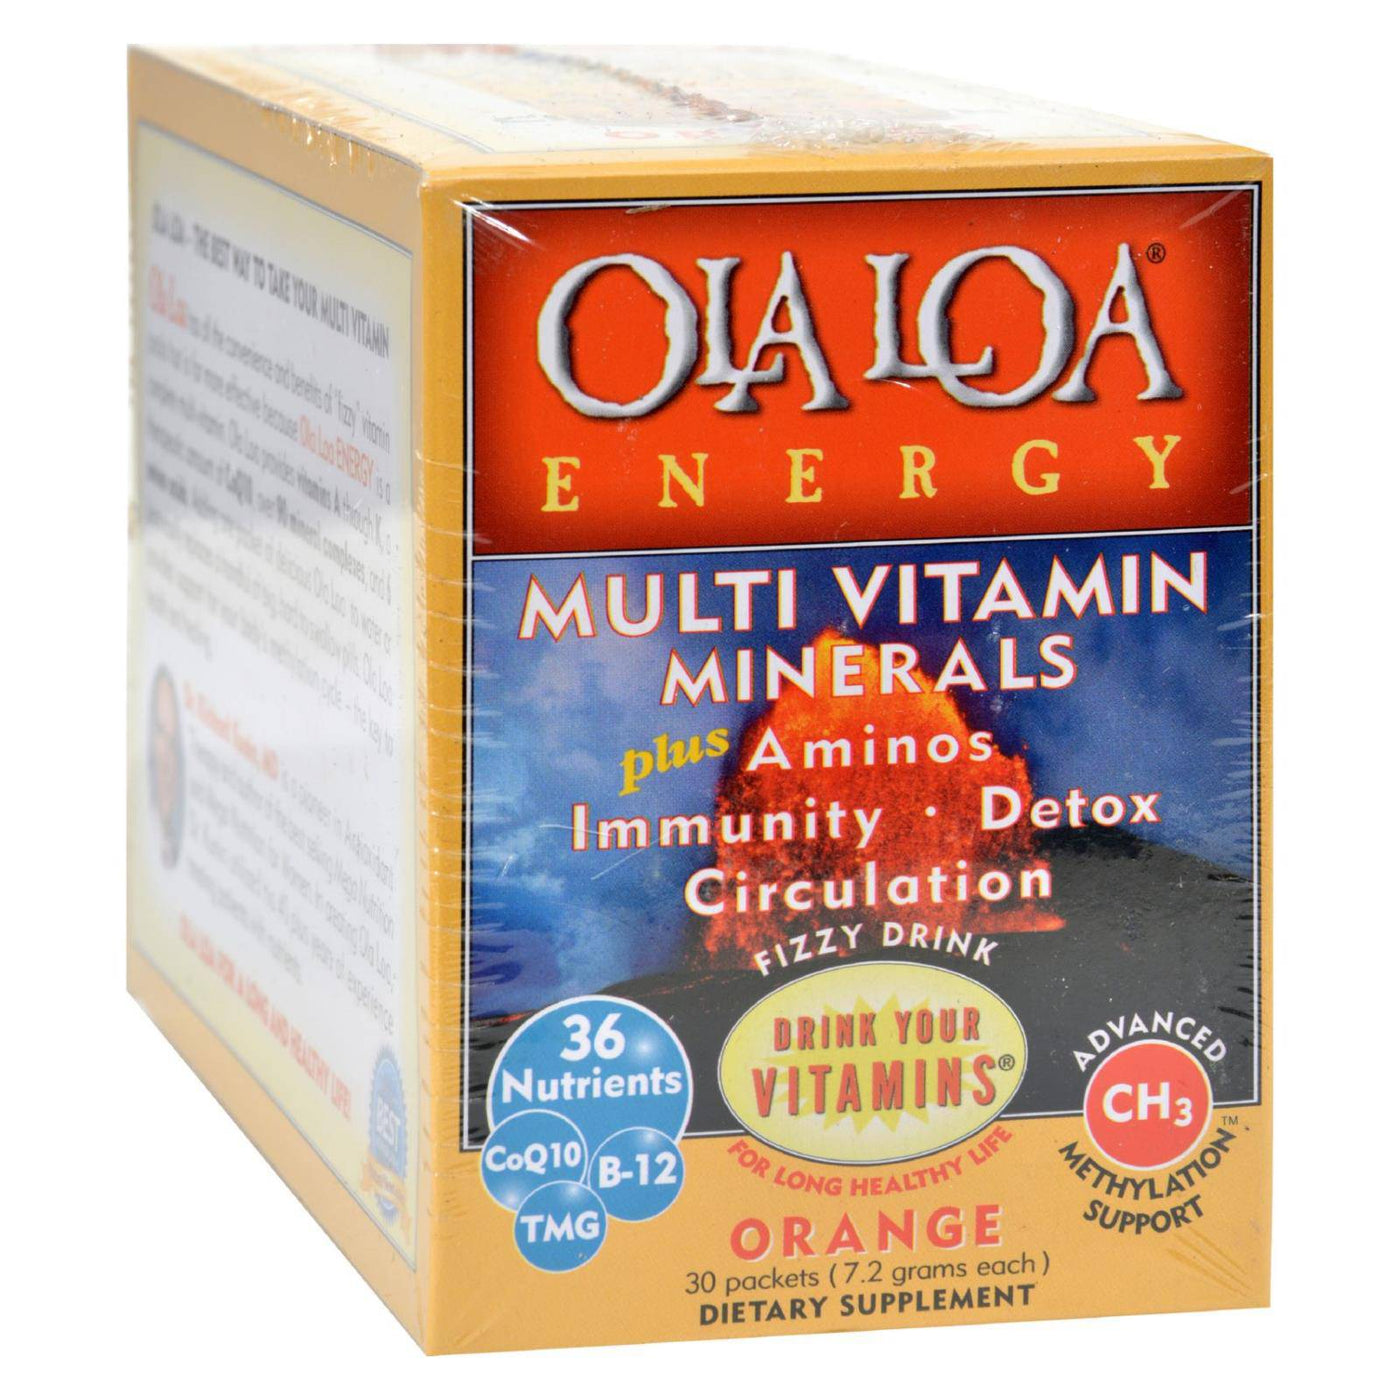 Buy Ola Loa Products Energy Multi Vitamin - Orange - 30 Packet  at OnlyNaturals.us